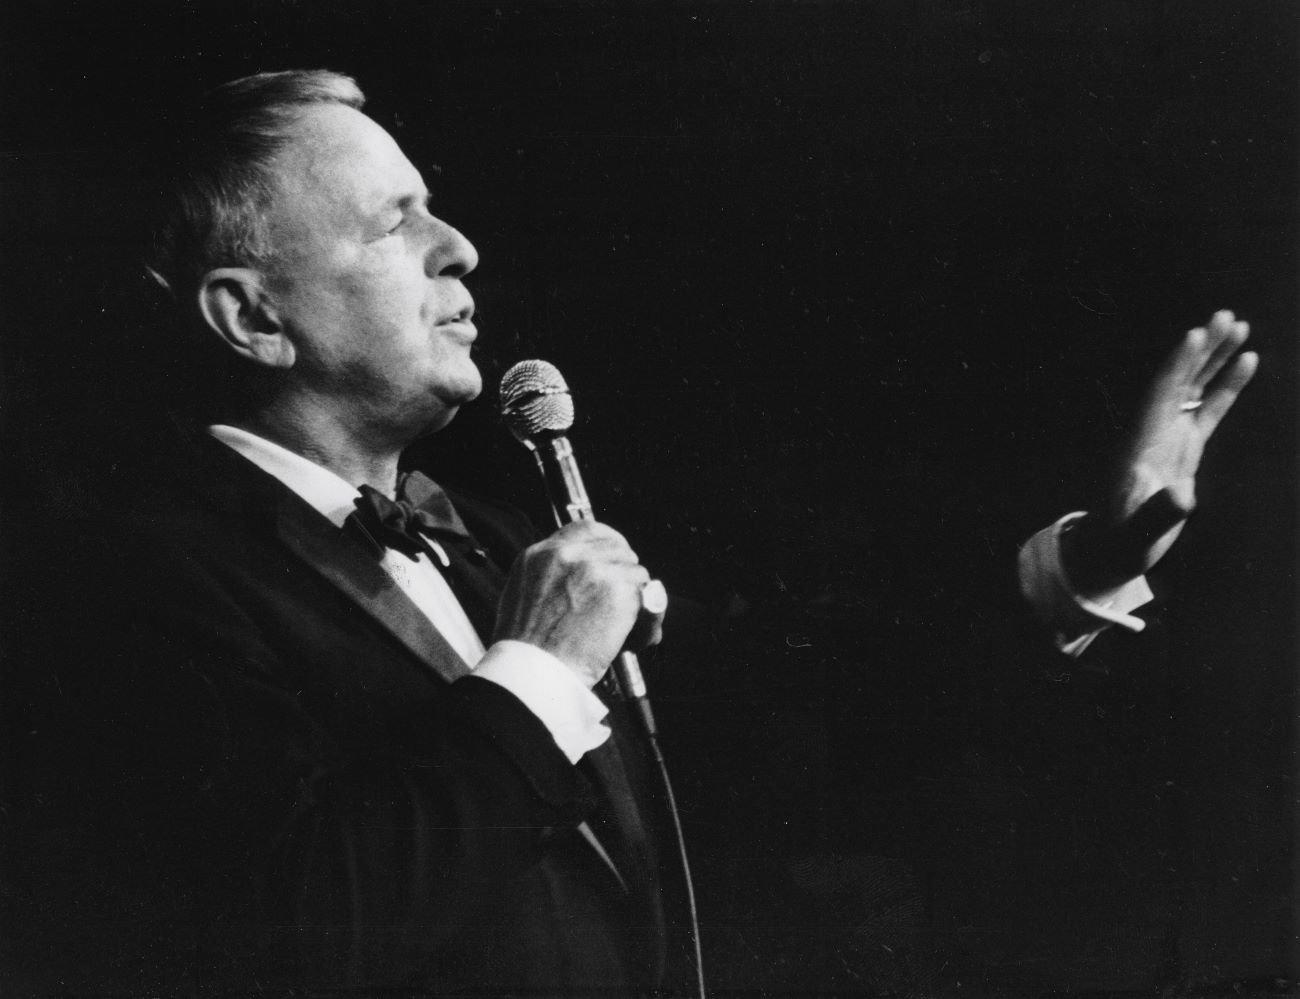 A black and white photo of singer Frank Sinatra wearing a tuxedo and holding a microphone.